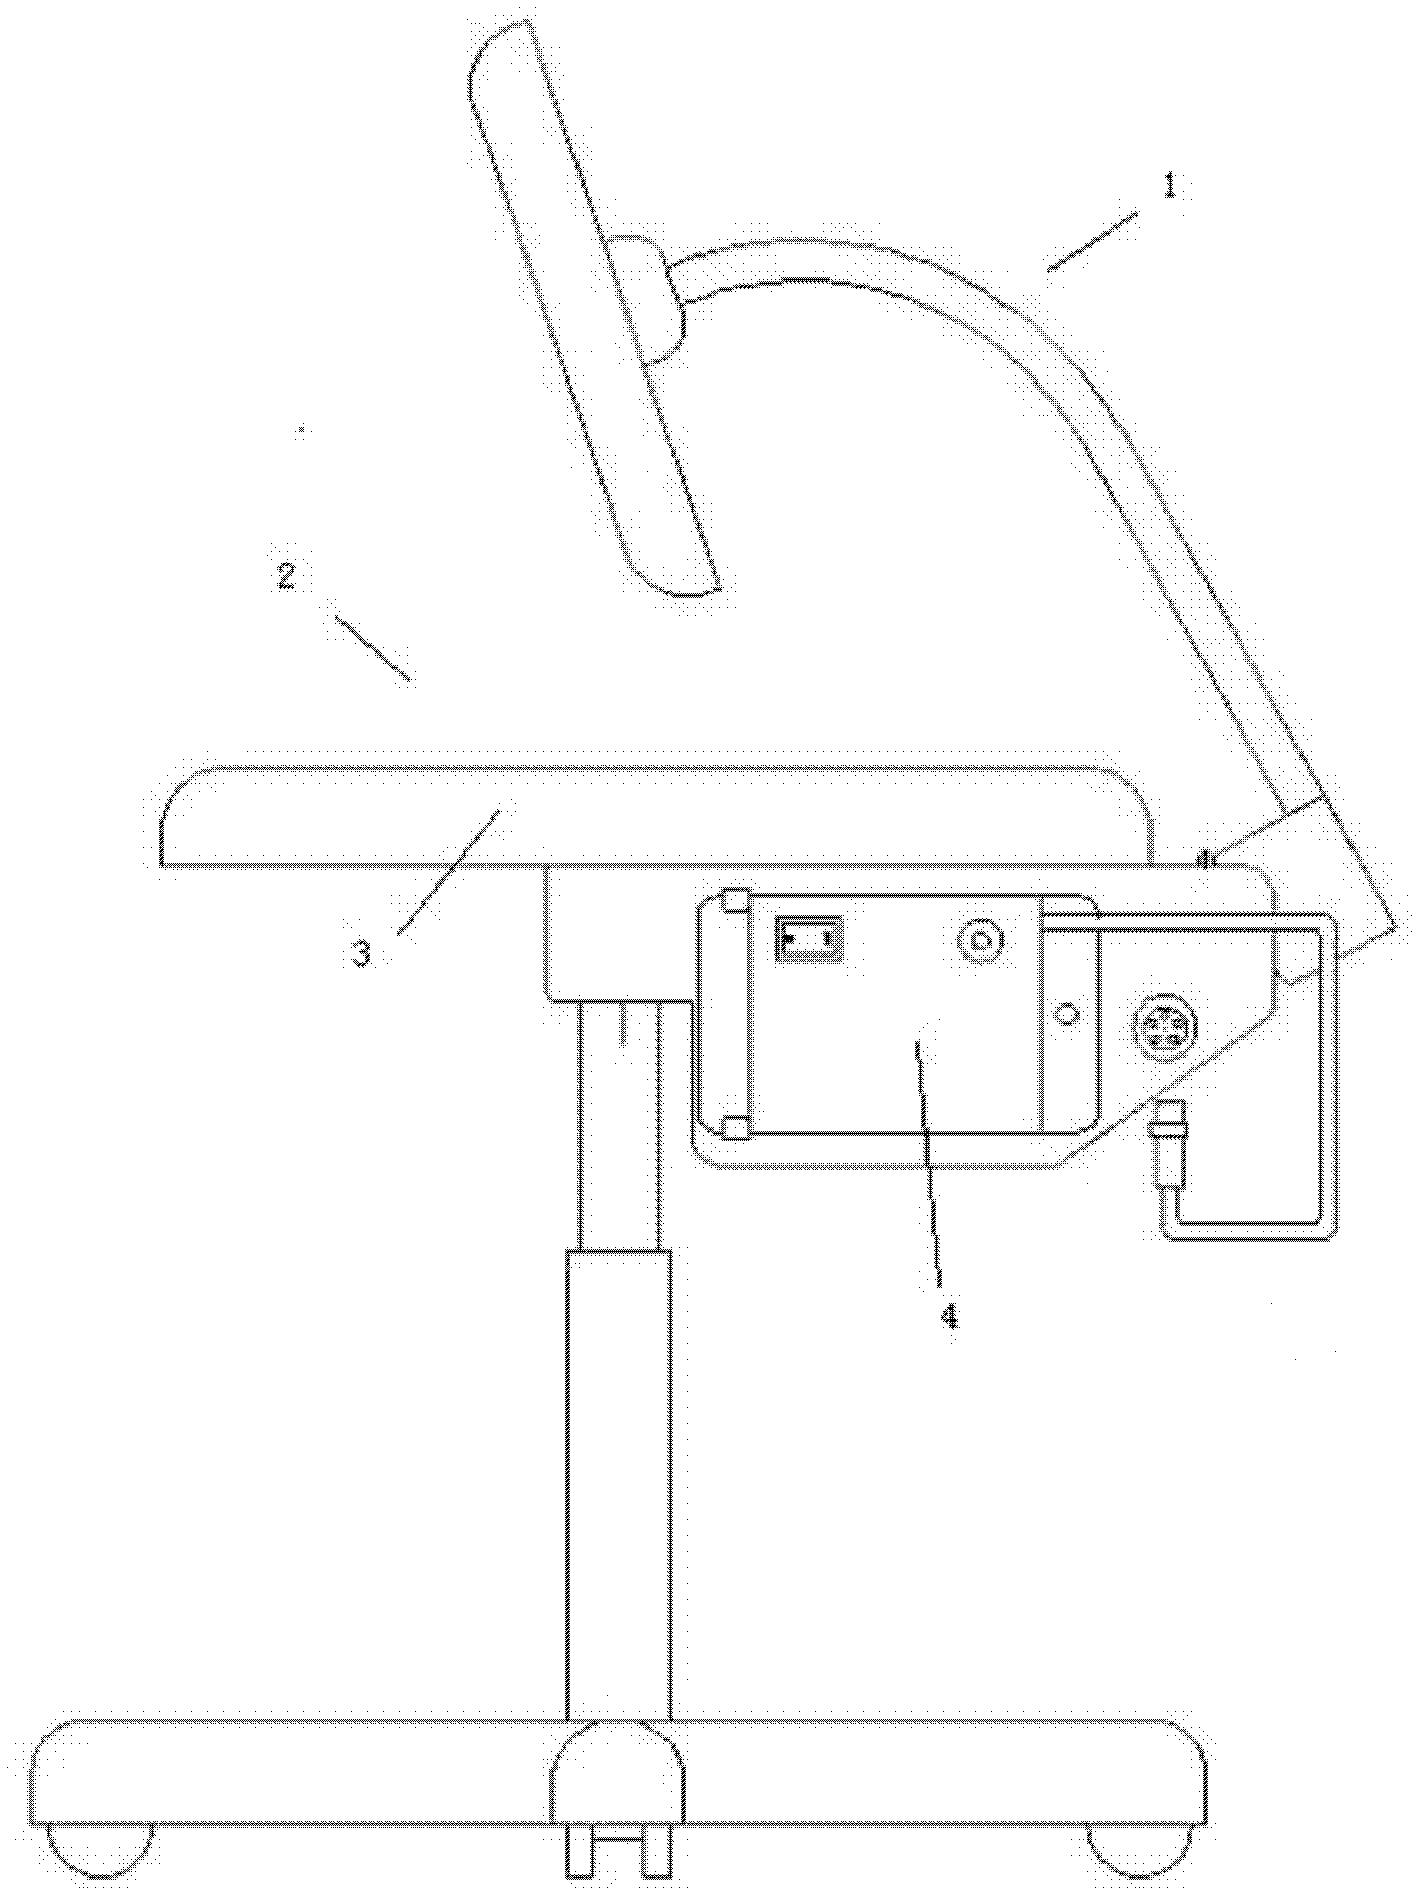 Chair and chair control system